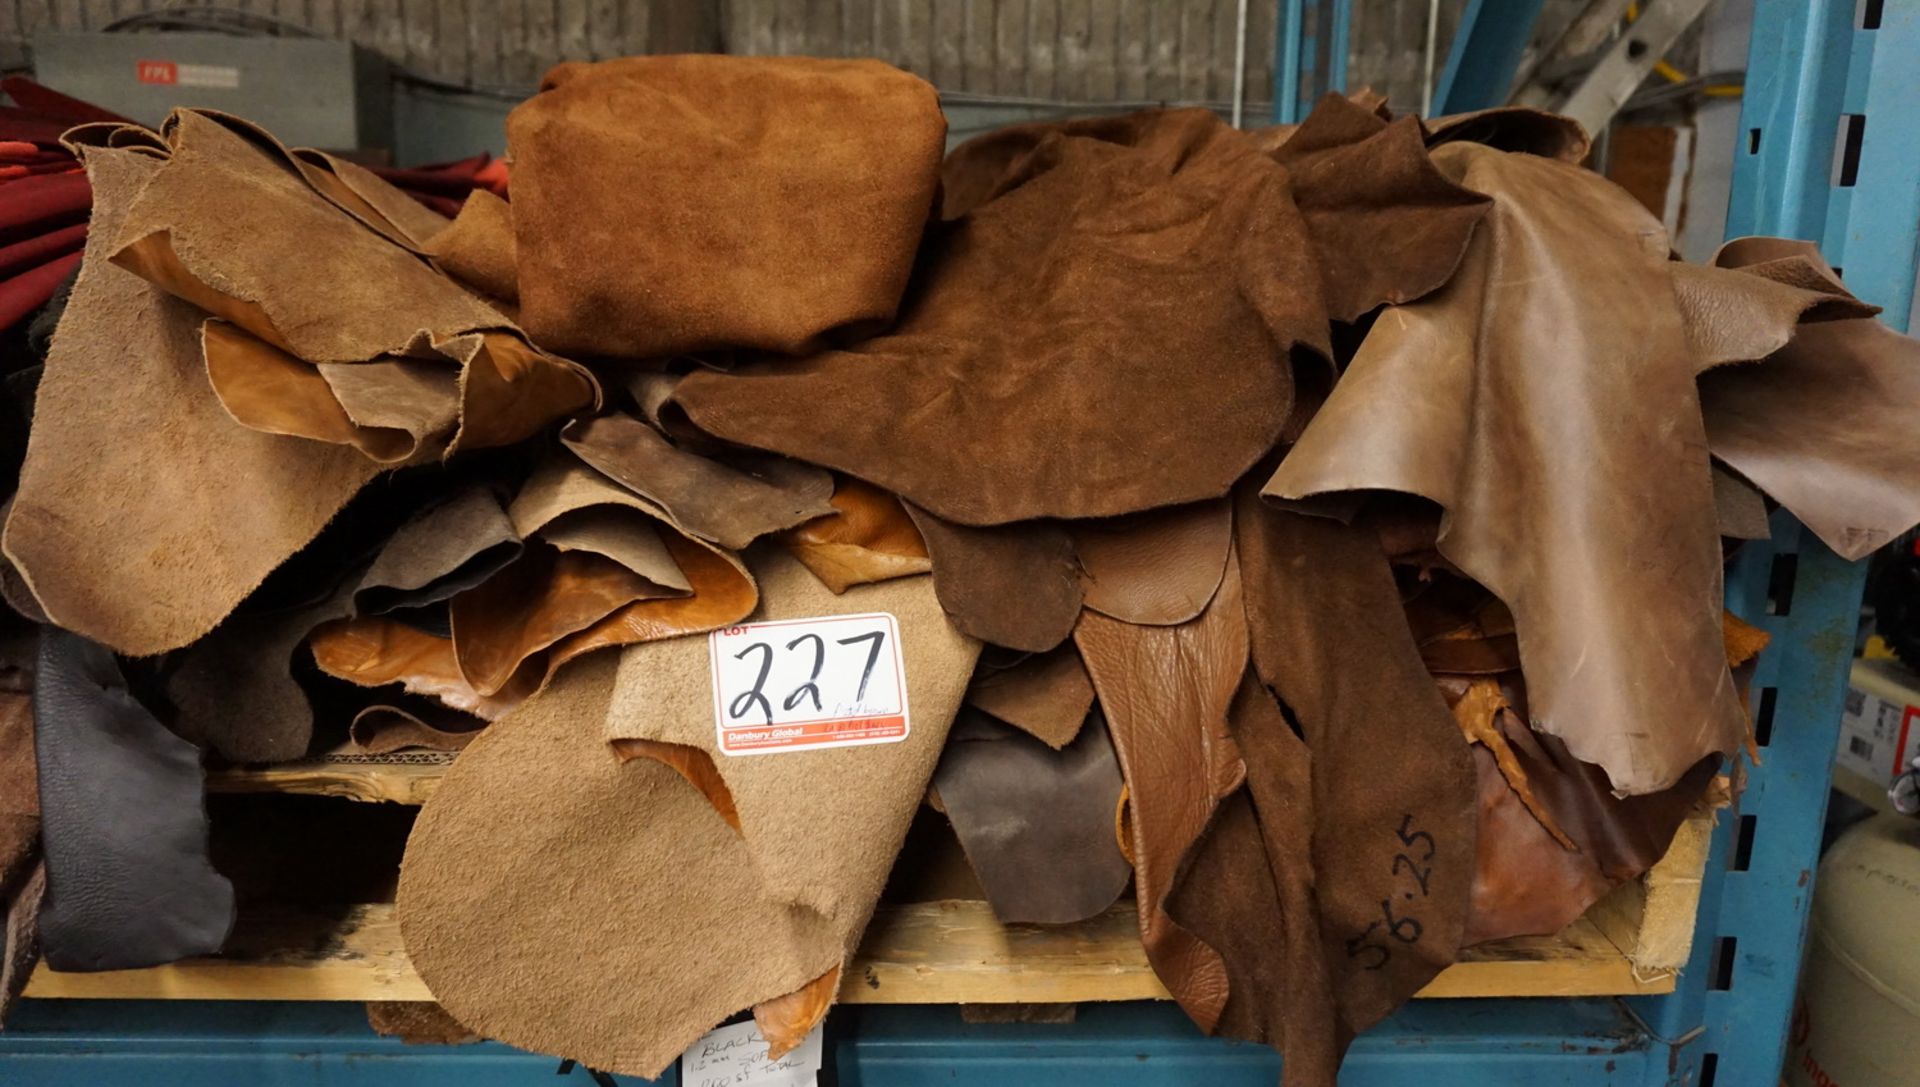 LOT - ASSTD BROWN UPHOLSTERY LEATHER (24 HIDES)